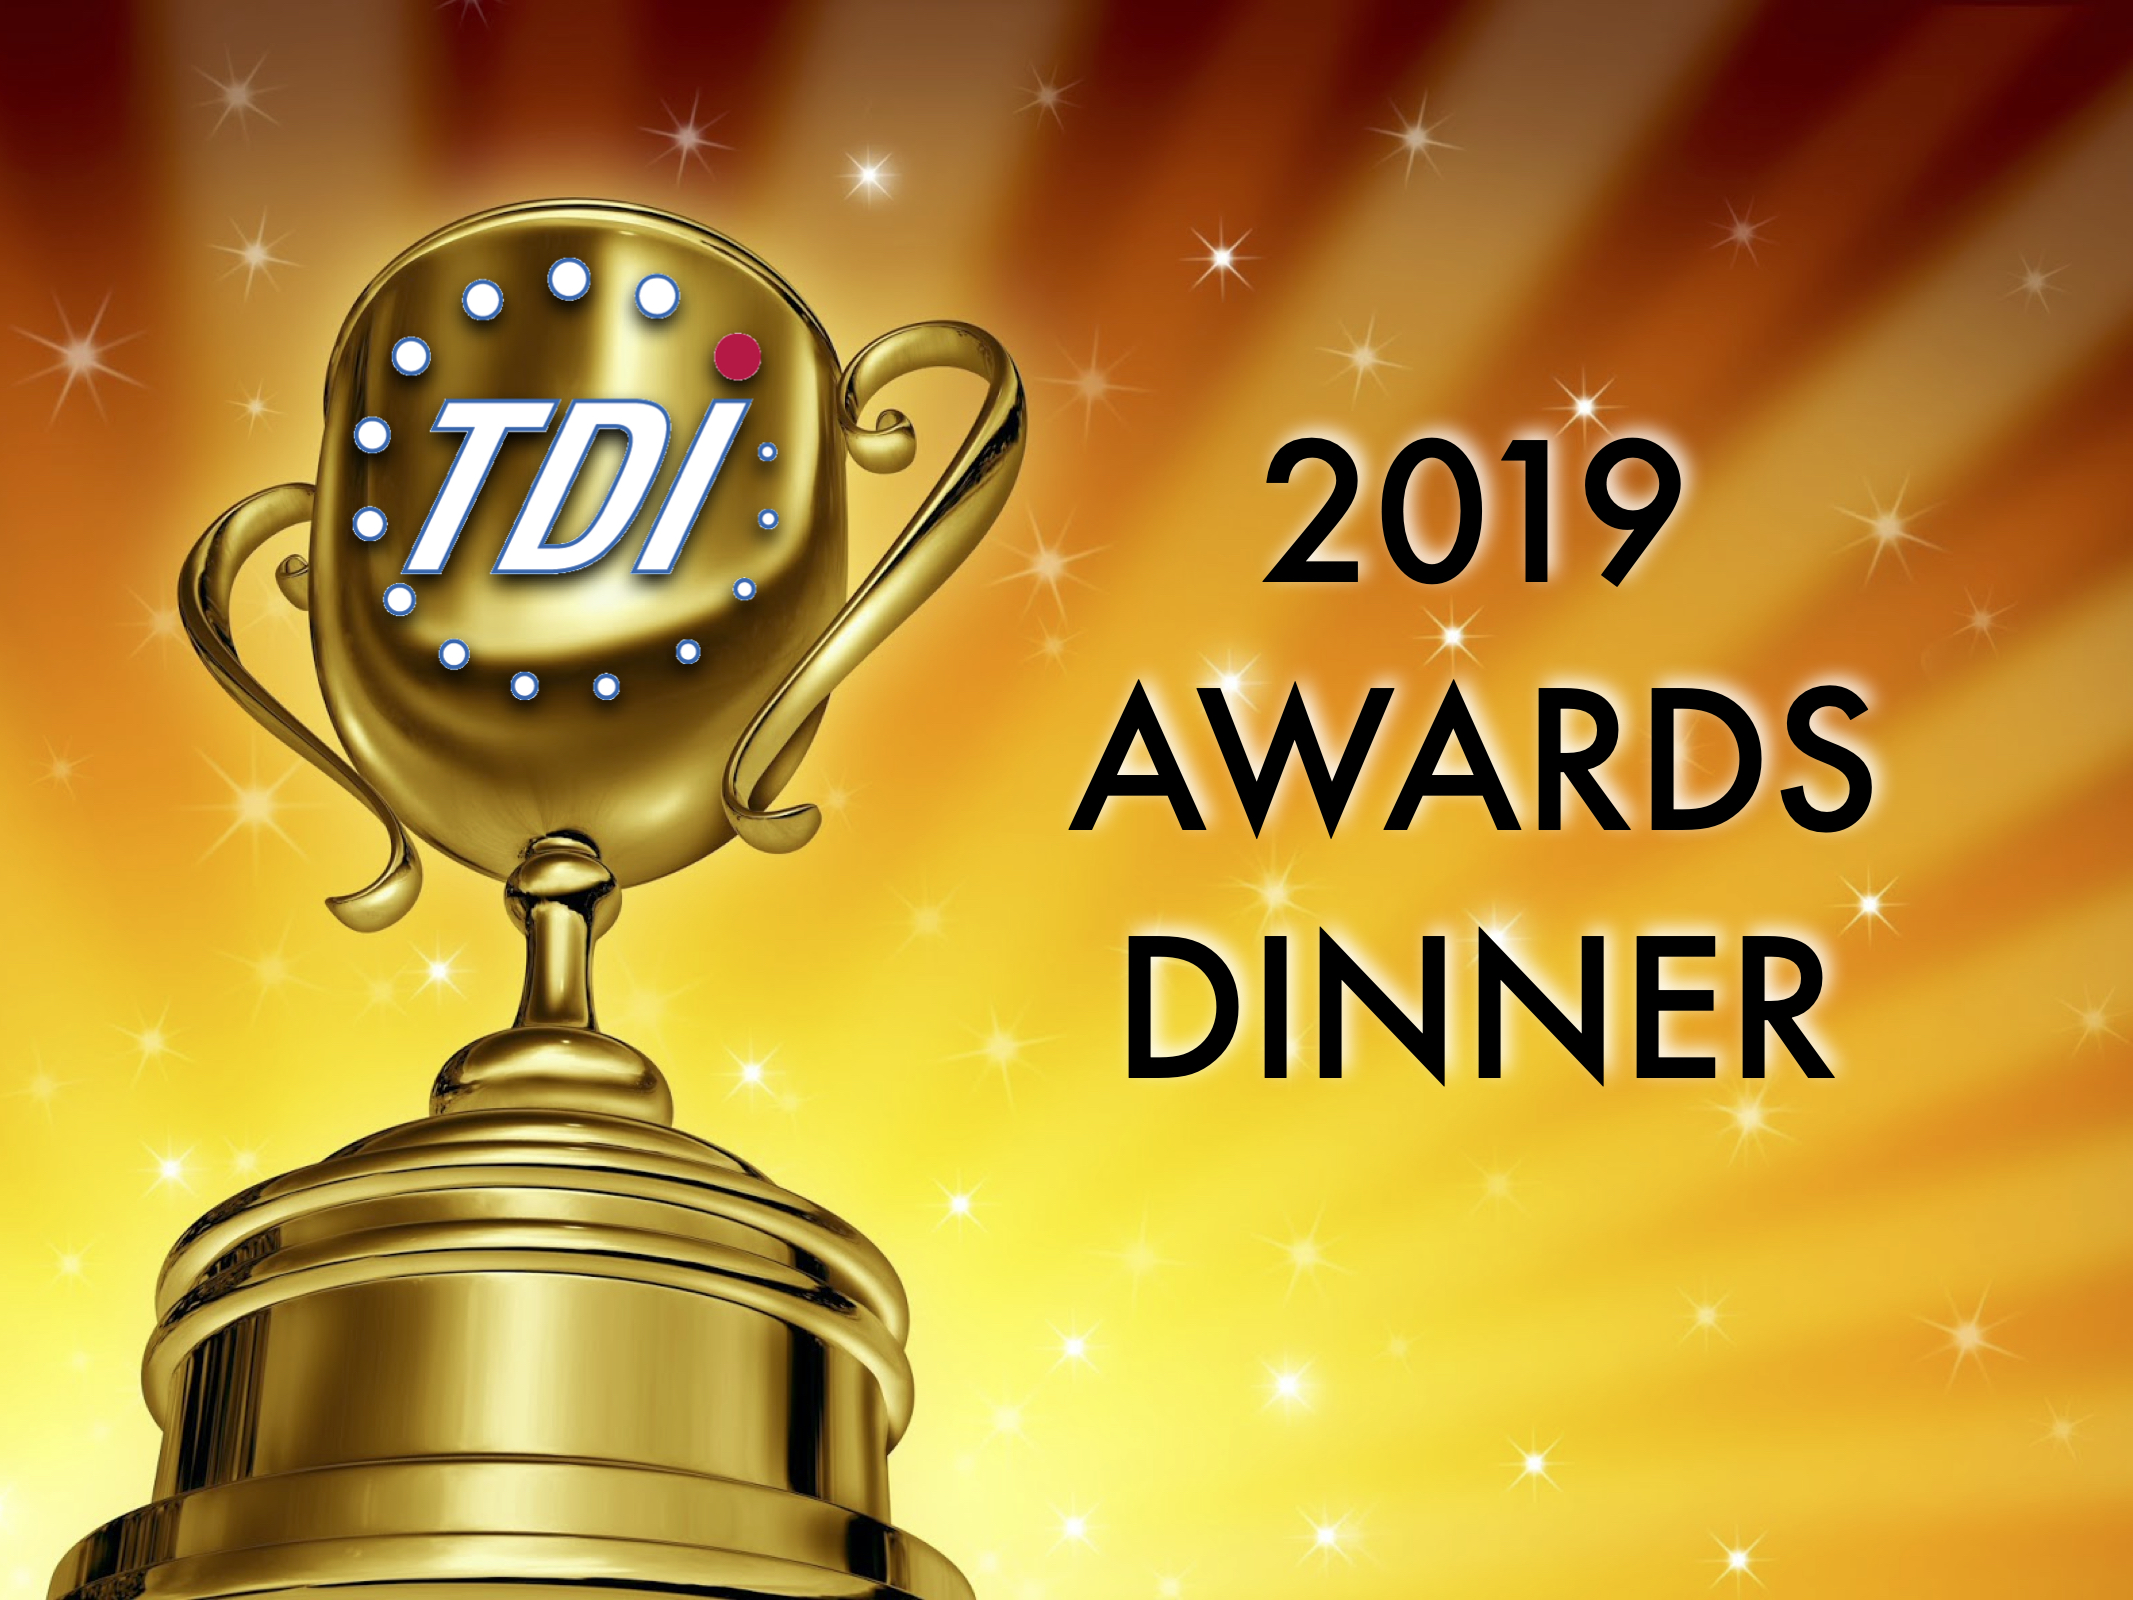 Large gold trophy with TDI logo with a bright yellow and orange background with white stars. Text shown "2019 TDI Awards Dinner"